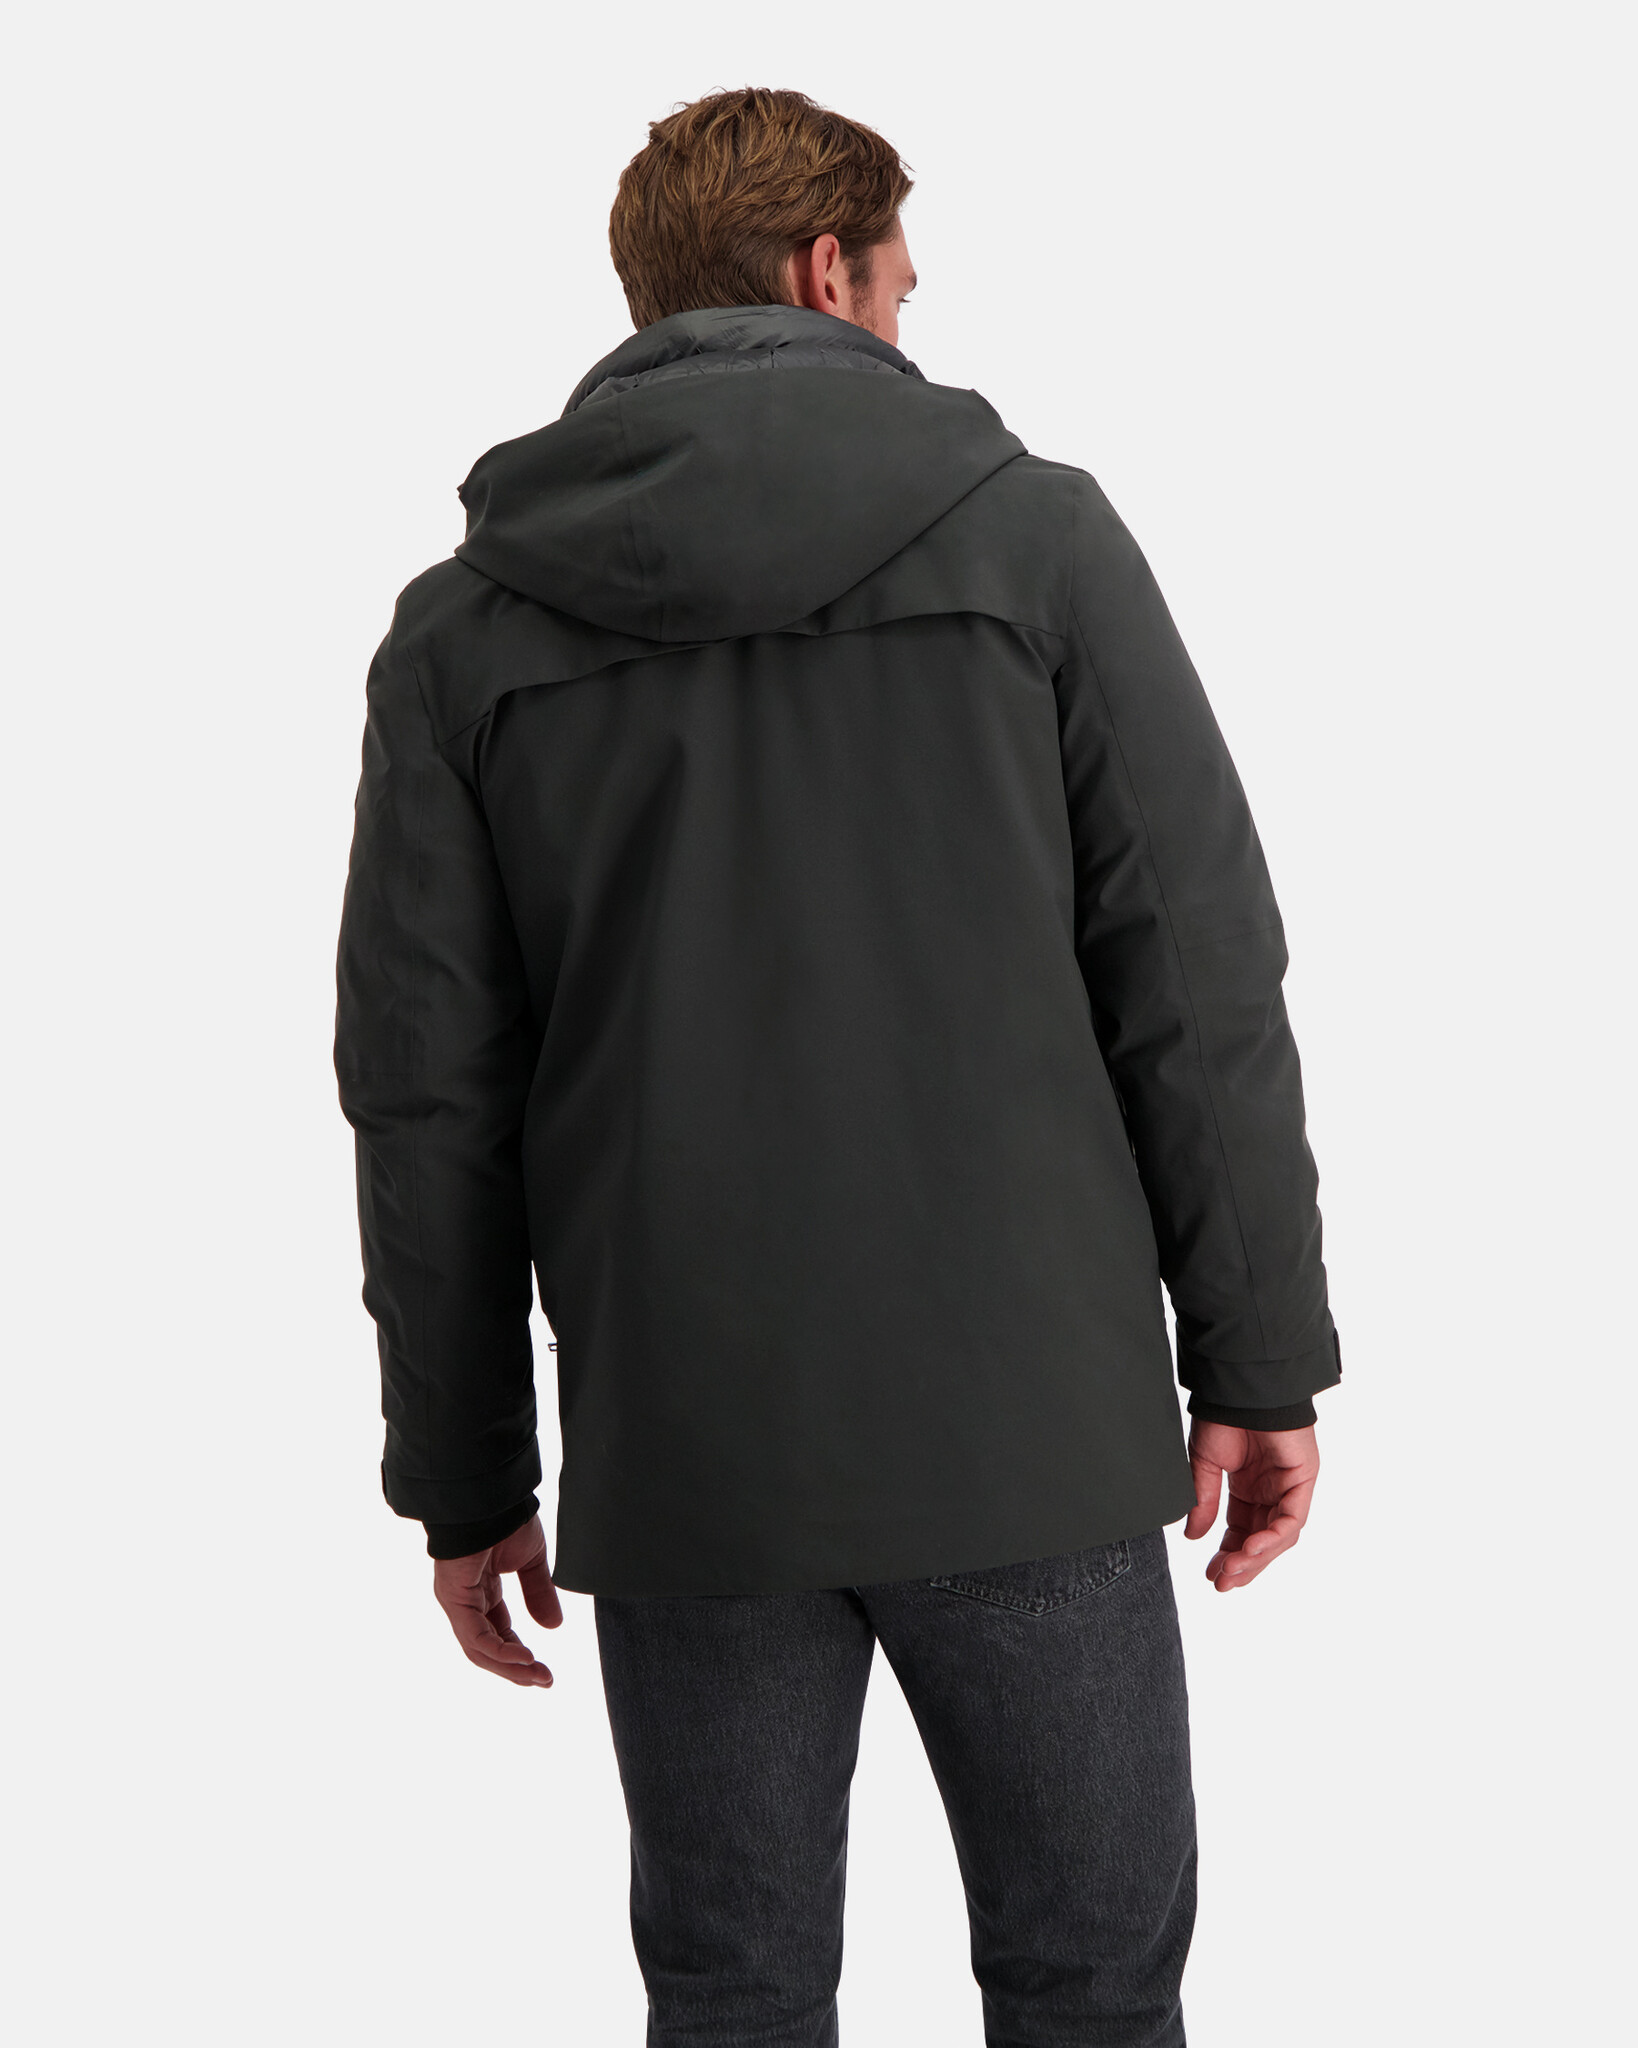 Waterproof jacket with fixed hood, 2layer mechanical stretch fabric, taped seams and REPREVE® padding